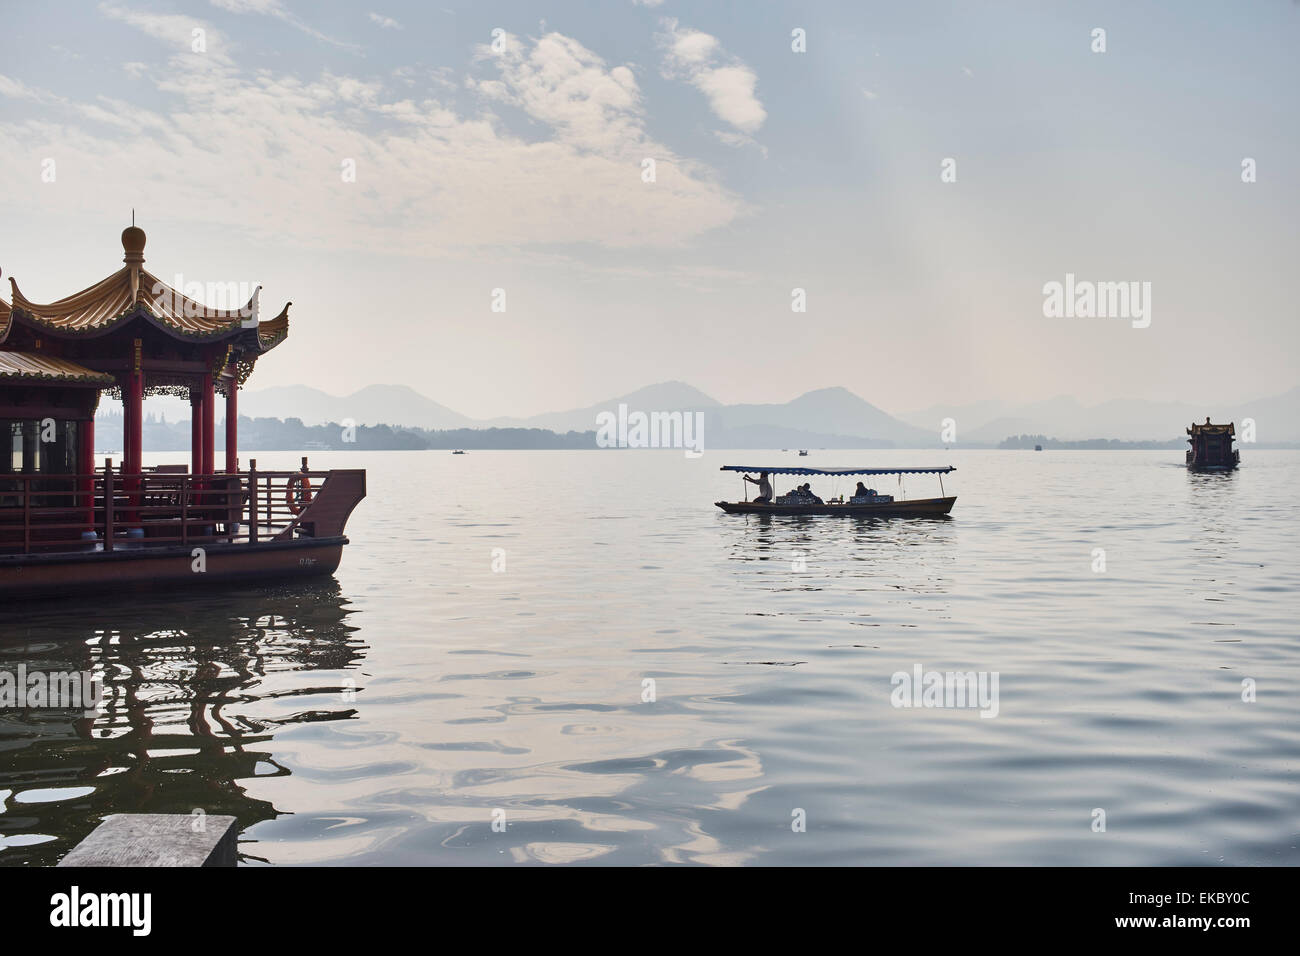 View of silhouetted fishing boat and lakeside restaurant on Westlake, Hangzhou, China Stock Photo